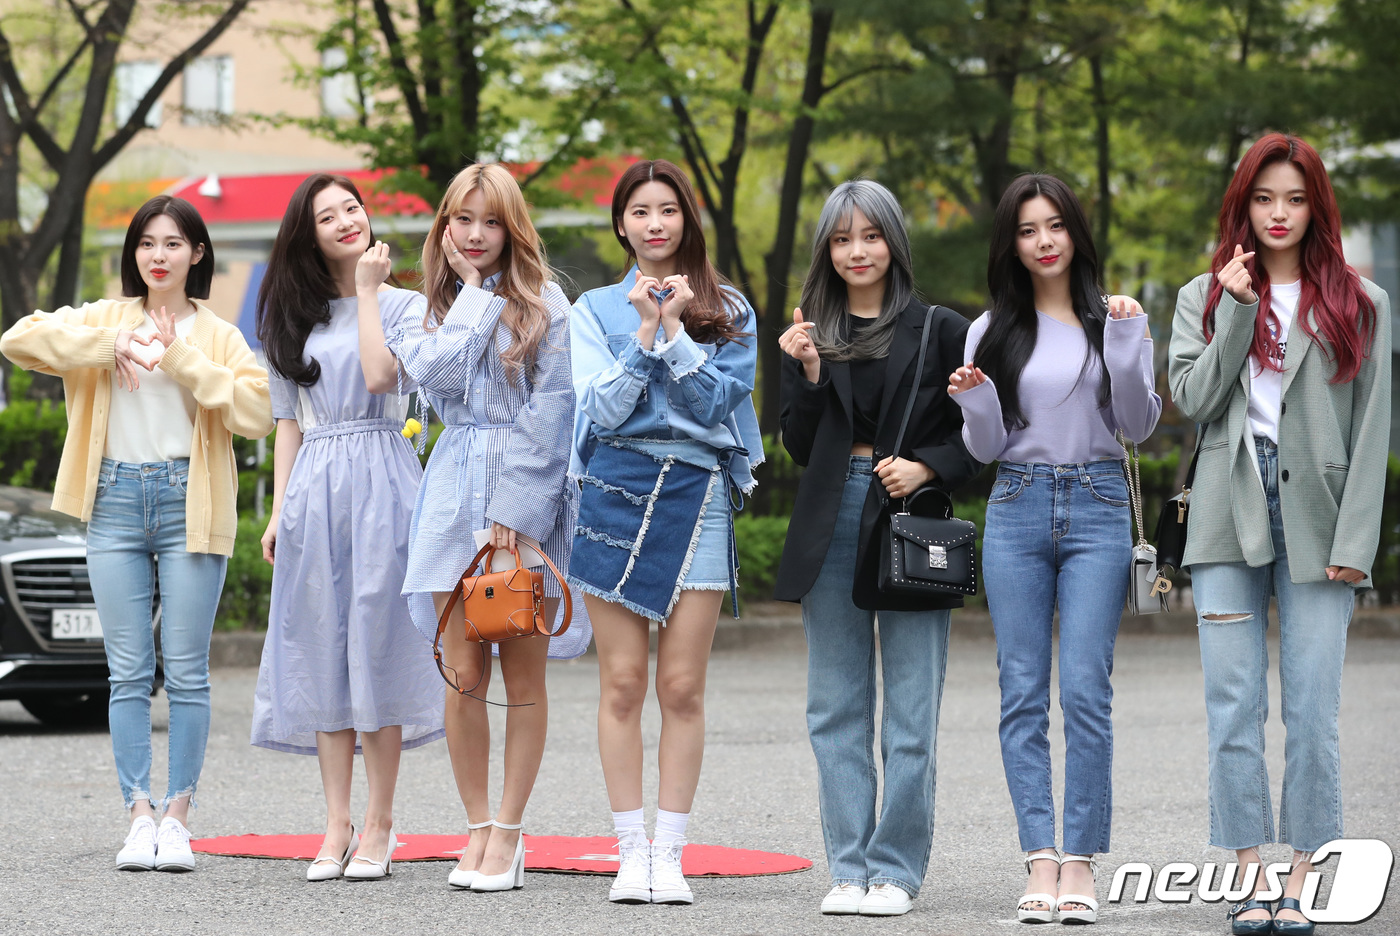 Seoul=) = DIA is greeting KBS2 Music Bank (Mu Bang) rehearsal held at KBS in Yeouido on the morning of the 19th.From left, Yevin, Jung Chae-yeon, Eunice, Eunjin, Ju Eun, Eun Chae, Som I. 2019.4.19